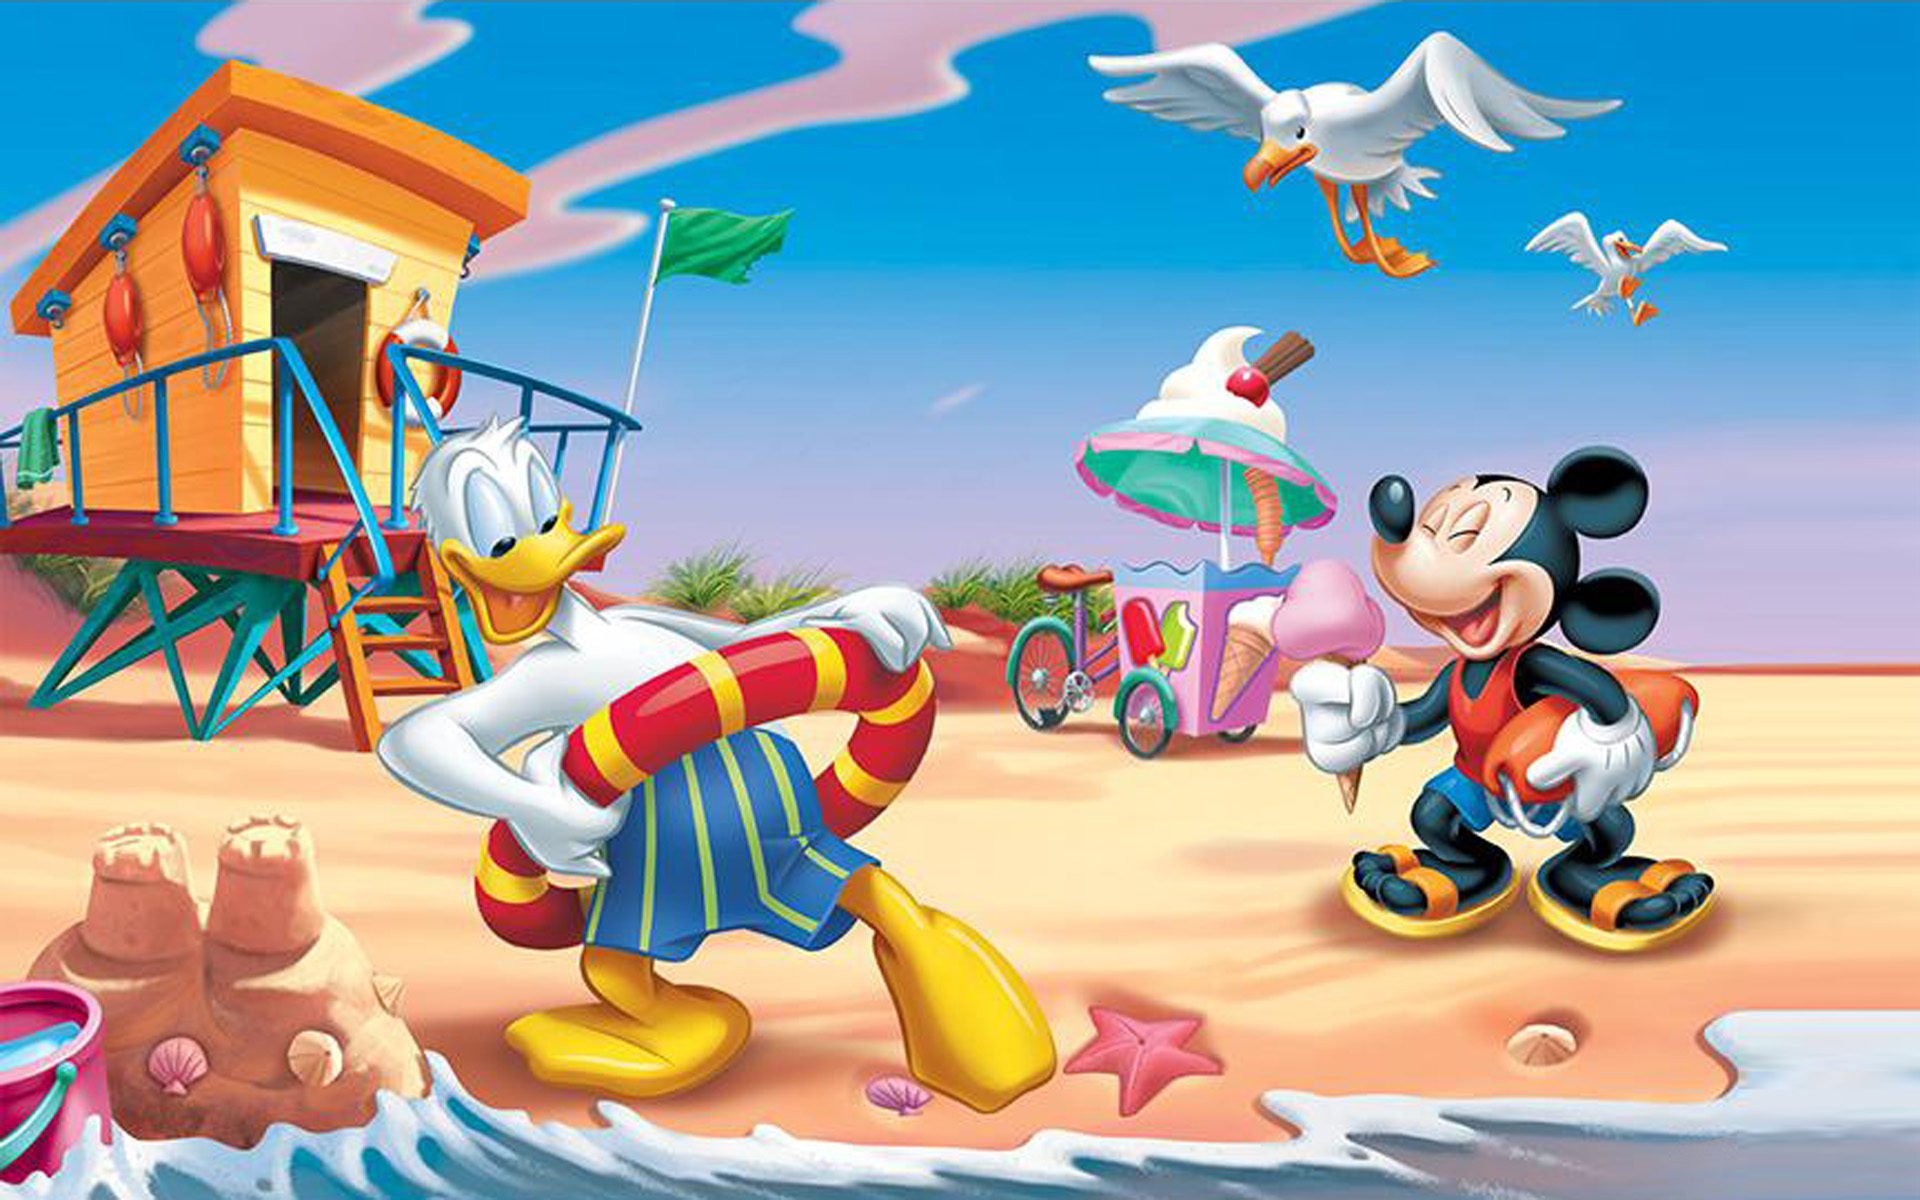 Donald Duck And Mickey Mouse Summer Vacation Beach HD Wallpaper For Mobile Phones Tablet And Pc 1920x1200, Wallpaper13.com